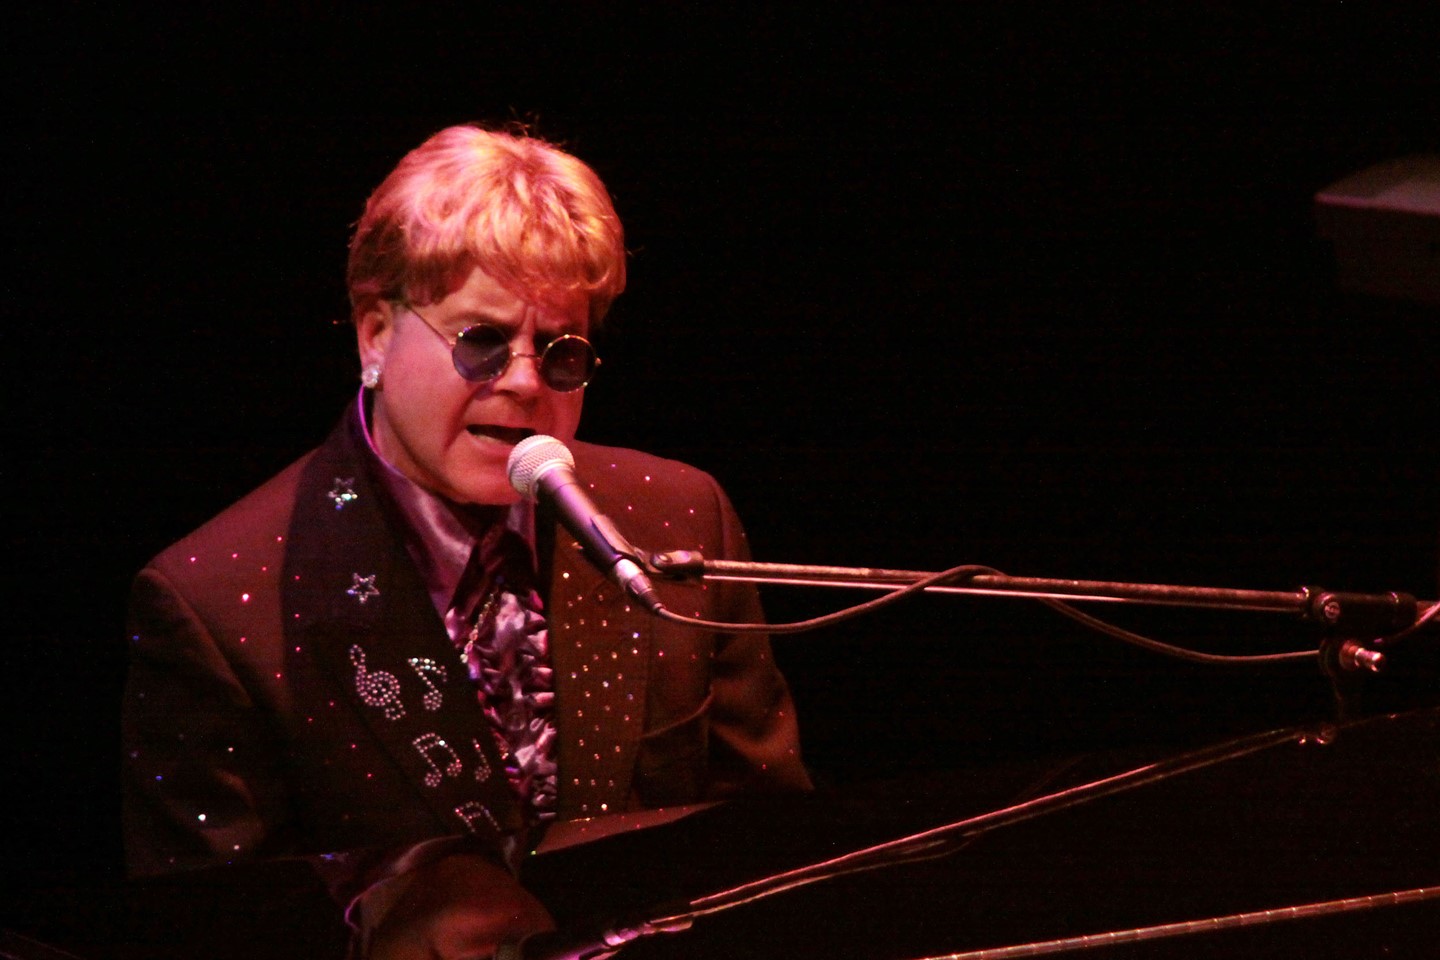 Ultimate Elton tribute playing the piano